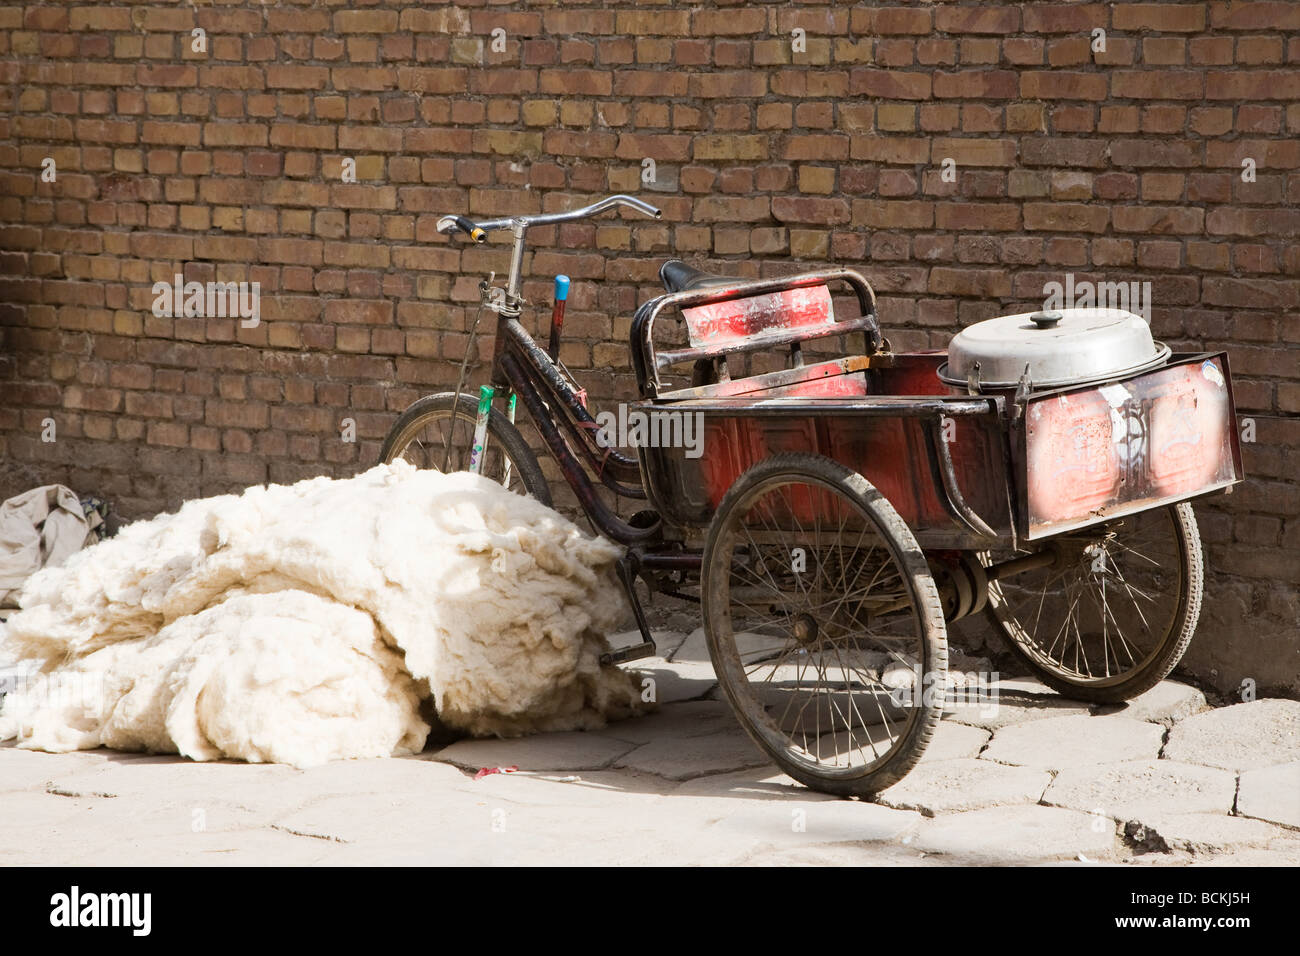 Bicycle next to pile of wool on footpath Stock Photo